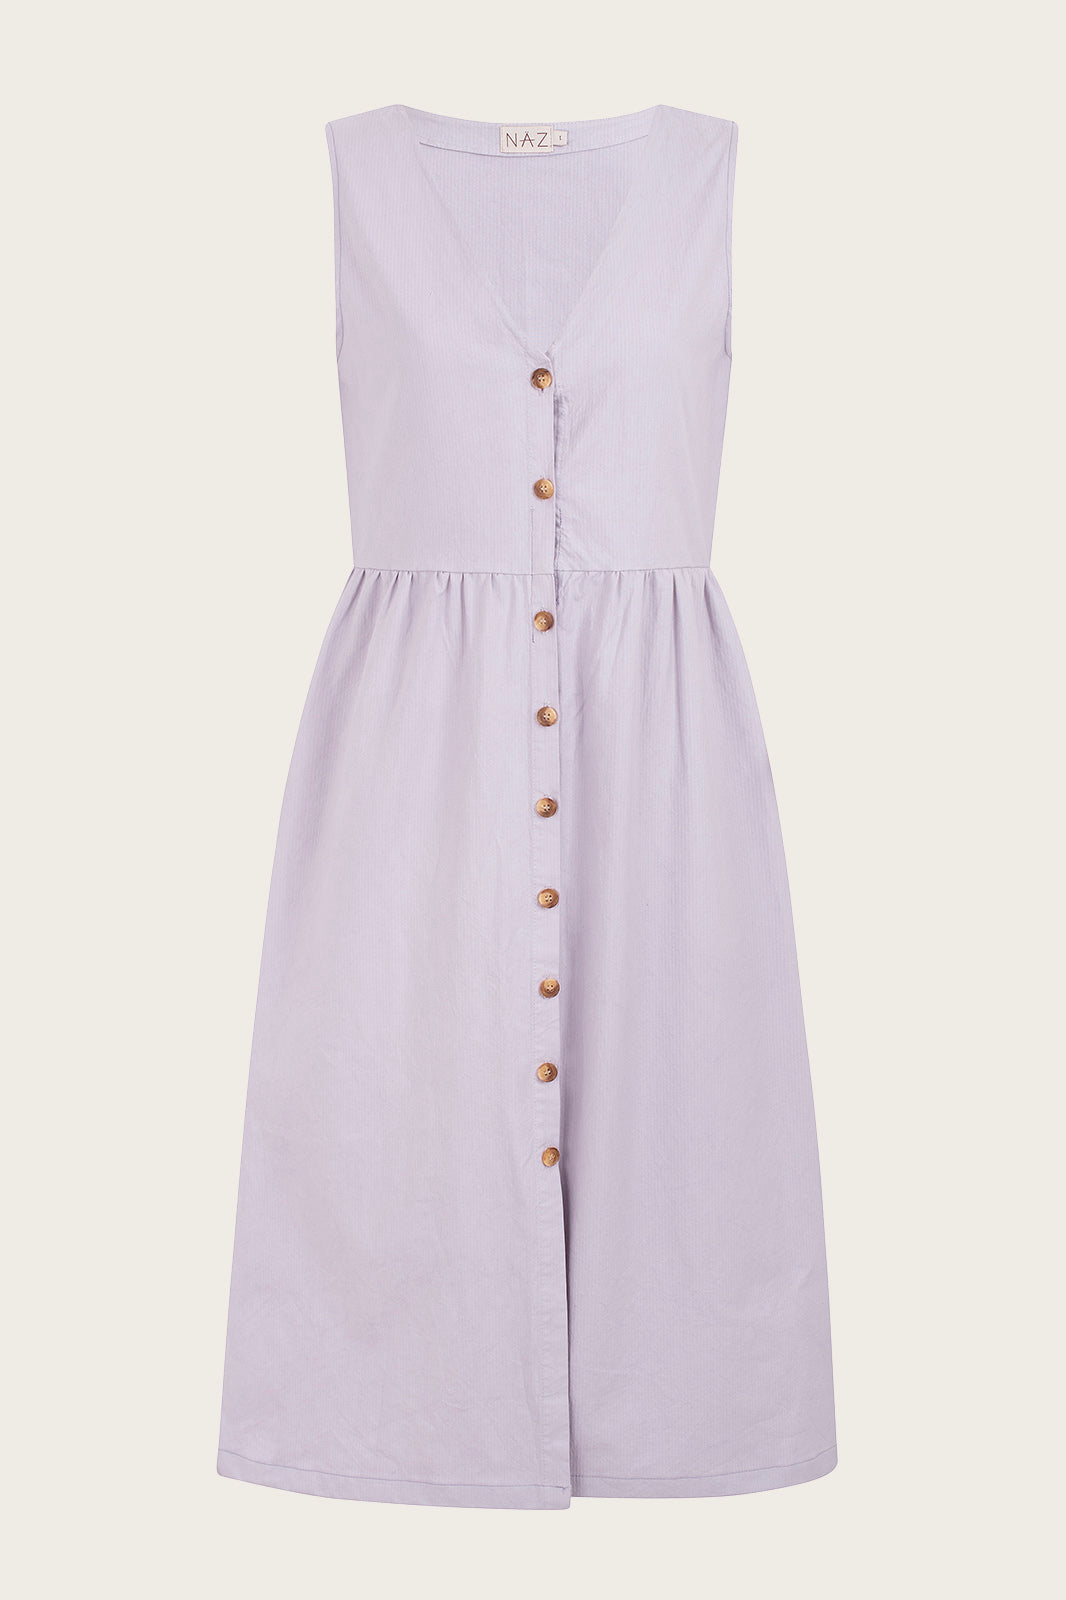 Naz women's summer dress with a buttoned front and deep v-neckline. Made from deadstock cotton in Portugal for lasting quality. 